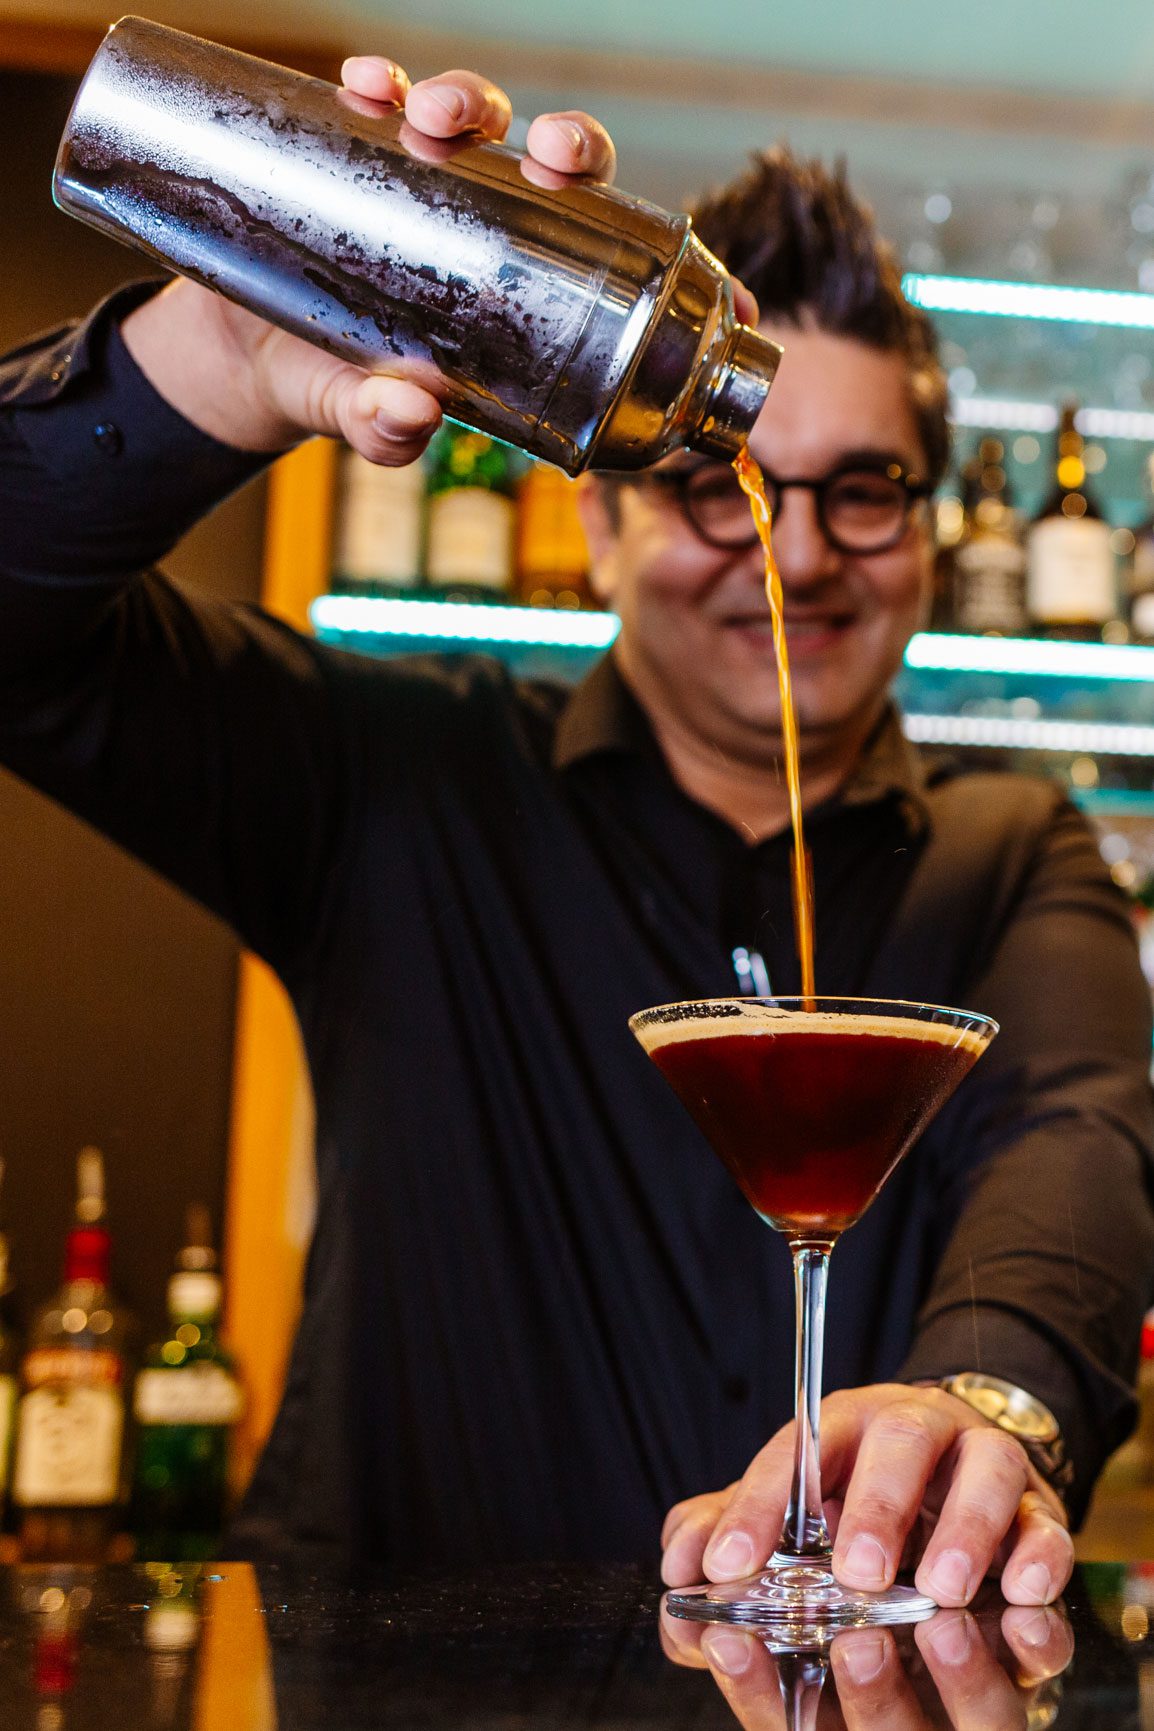 A middle age man dressed in black pours an espresso martini cocktail into a cocktail glass at the bar of The Carlton Hotel in Ilfracombe